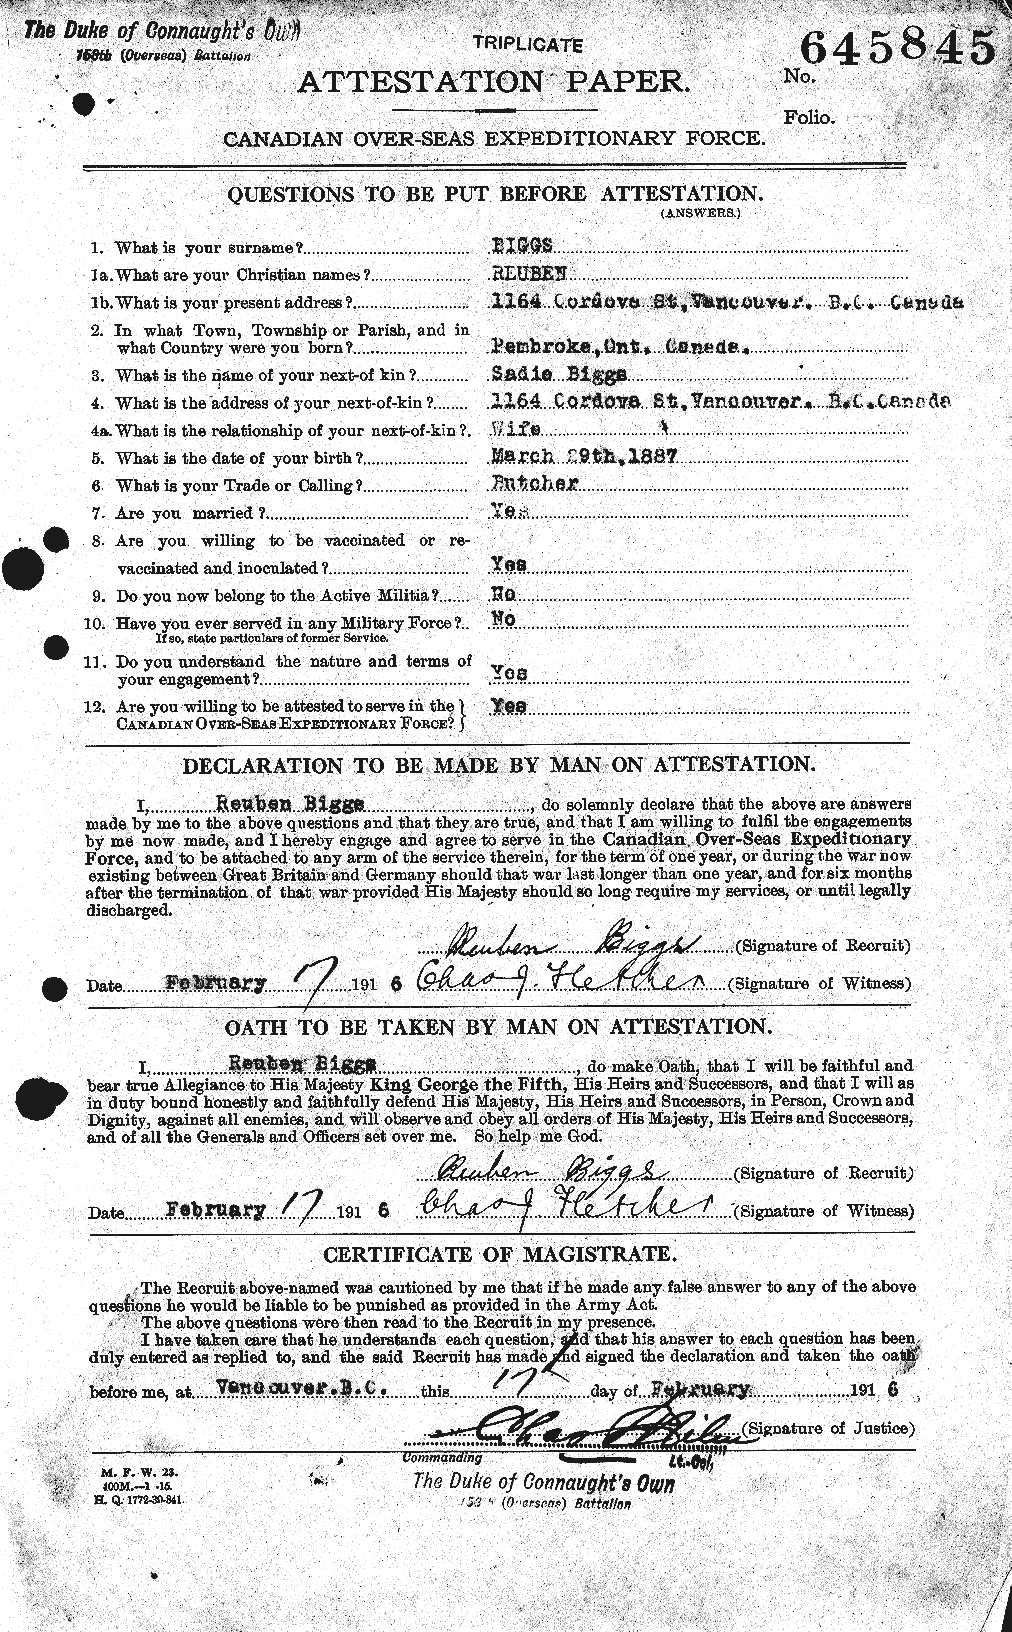 Personnel Records of the First World War - CEF 239166a